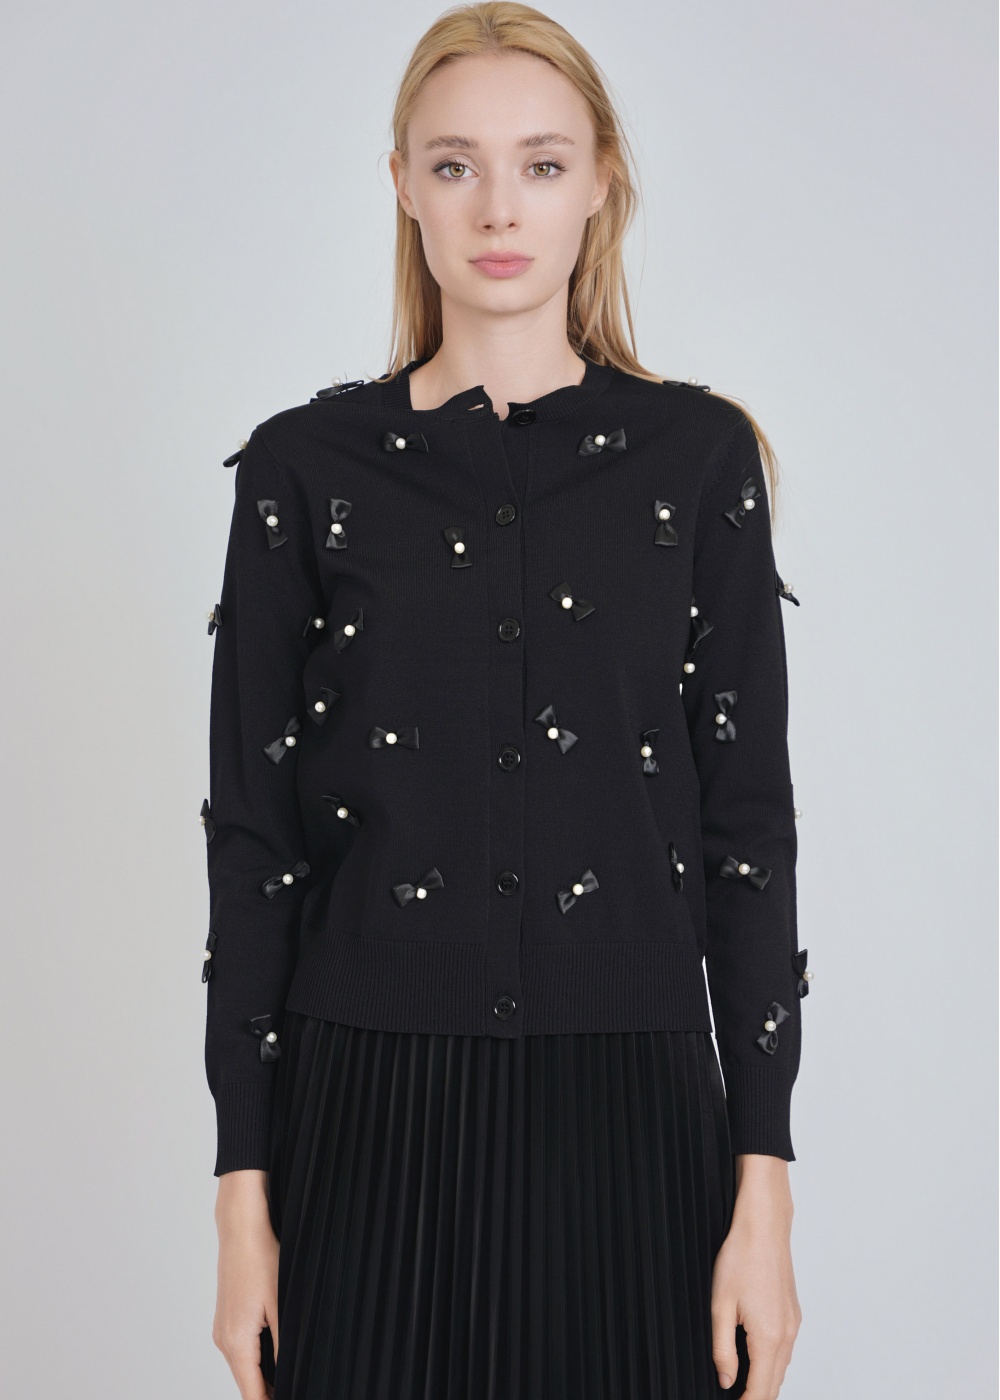 Knit Cardigan in Black with Artful Details